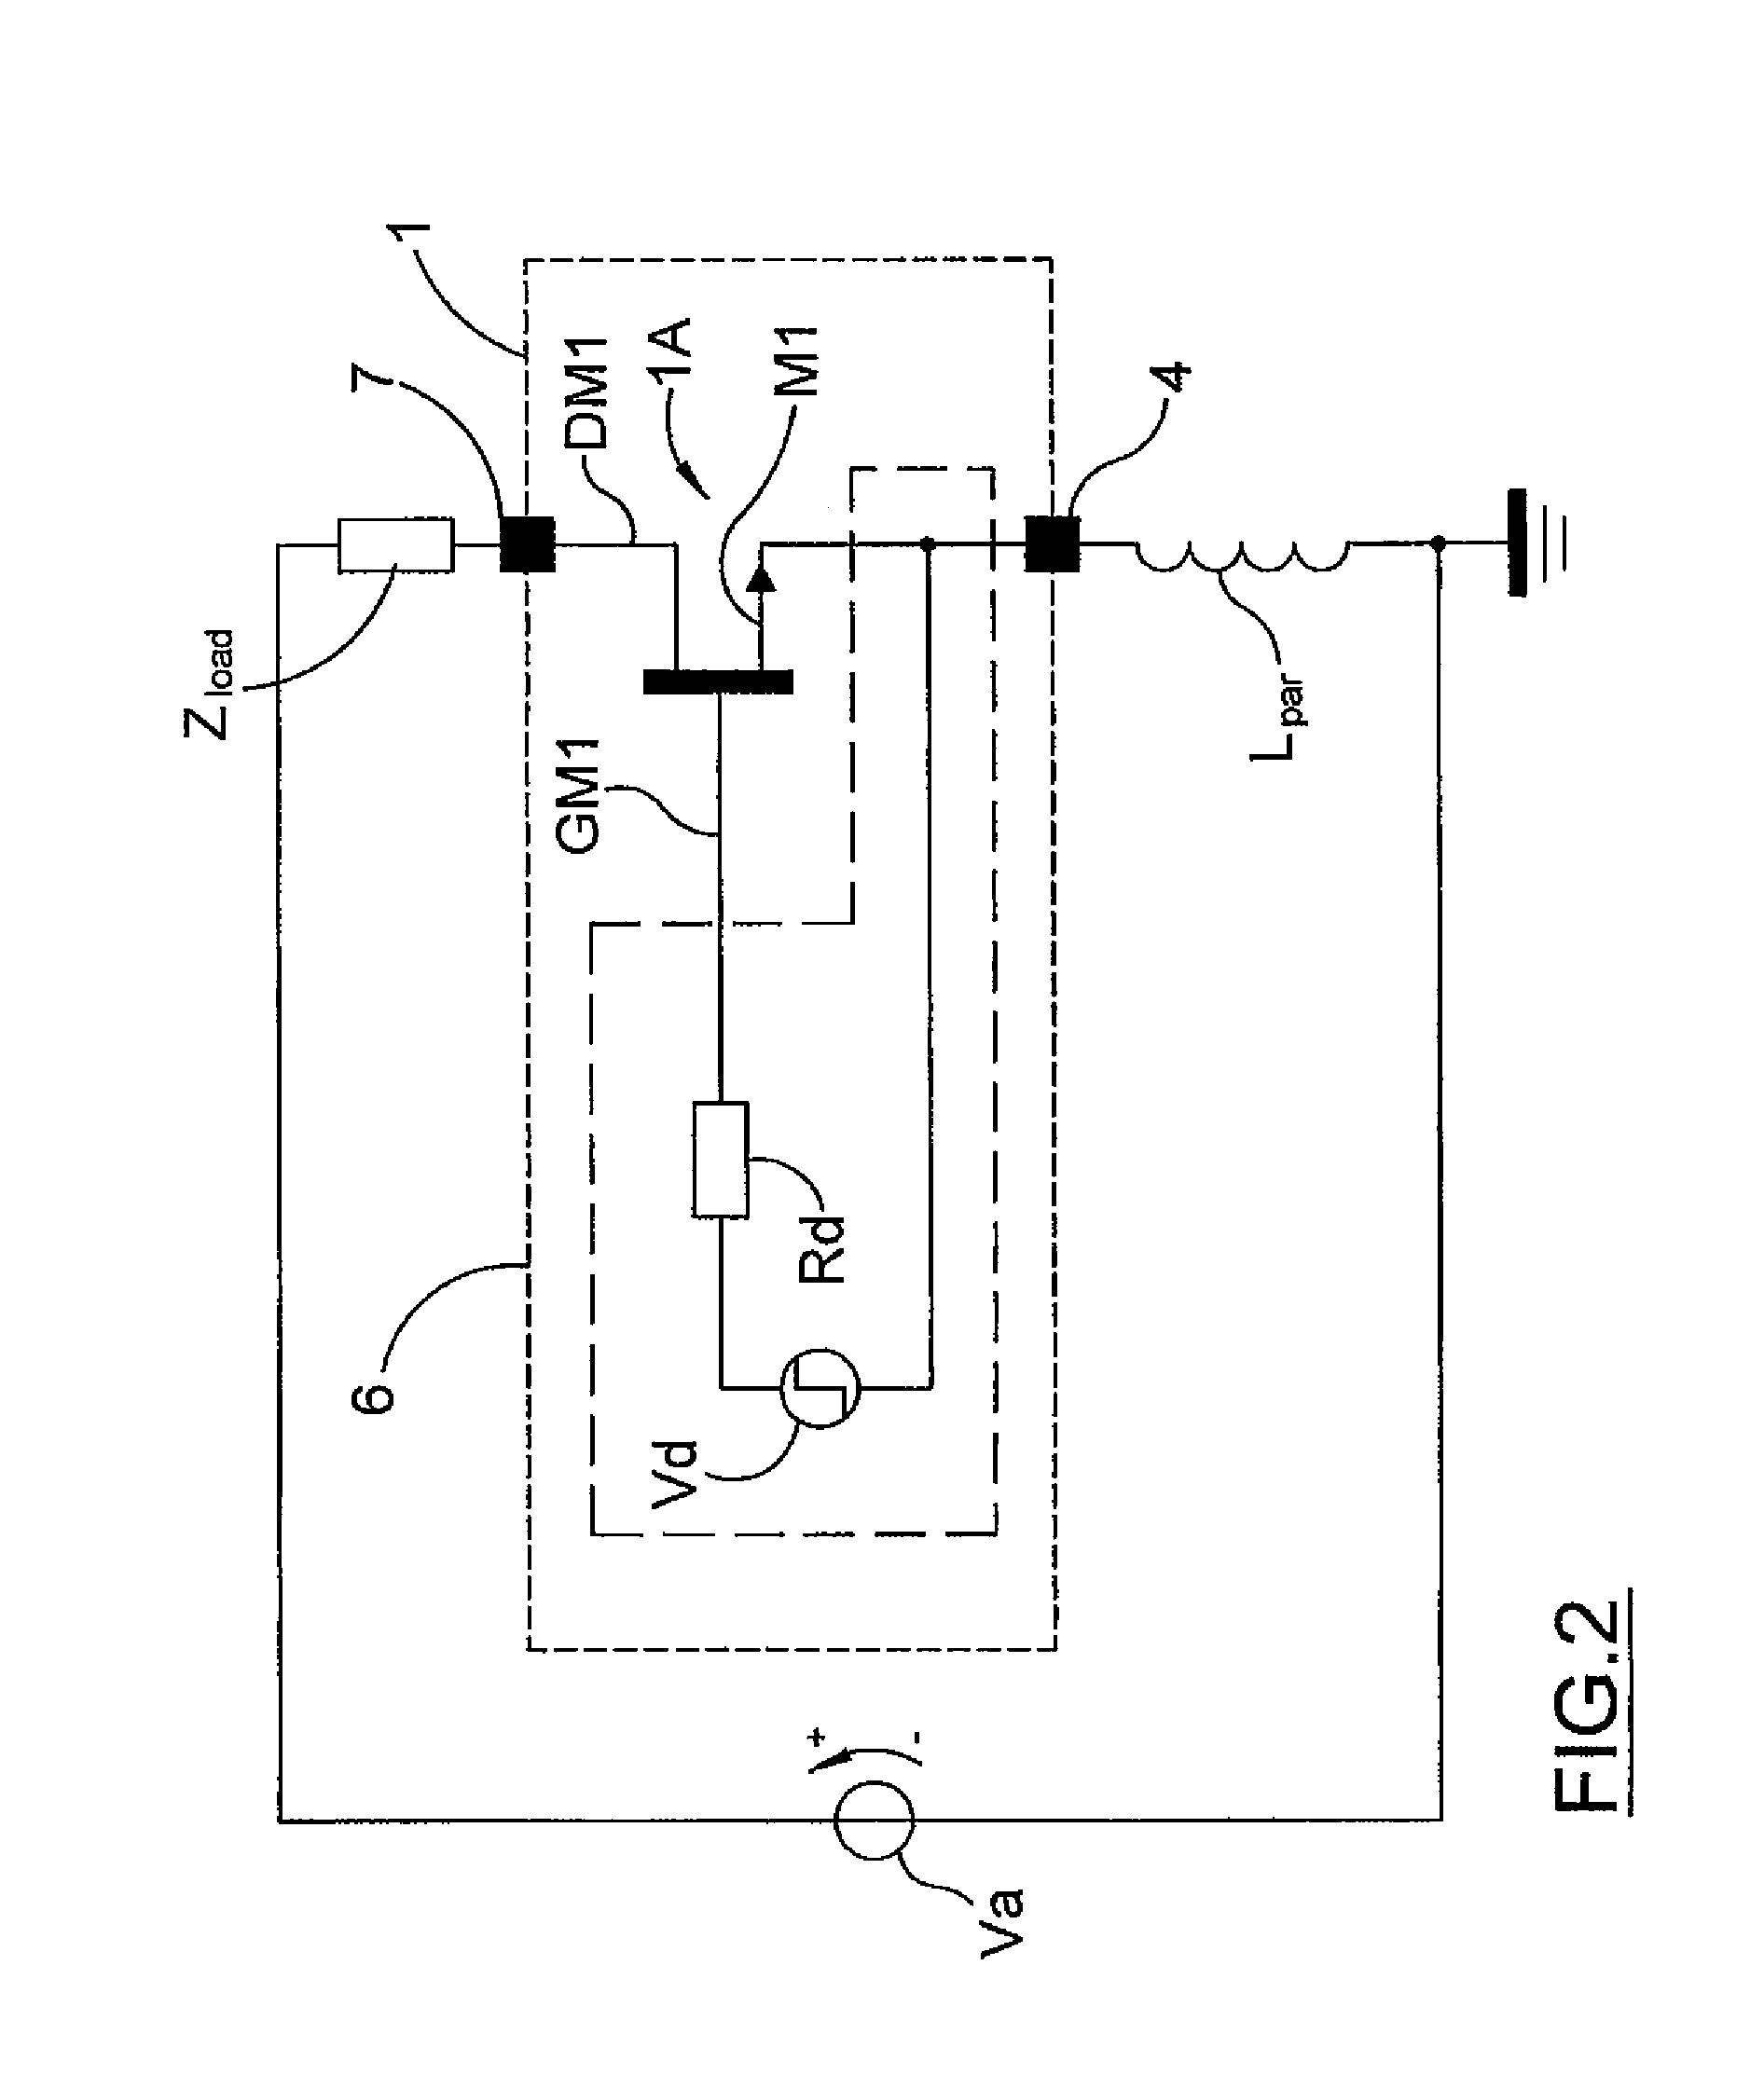 Power integrated circuit with high insensitivity to parasitic inductances of wires for connection to a package and package for said integrated circuit